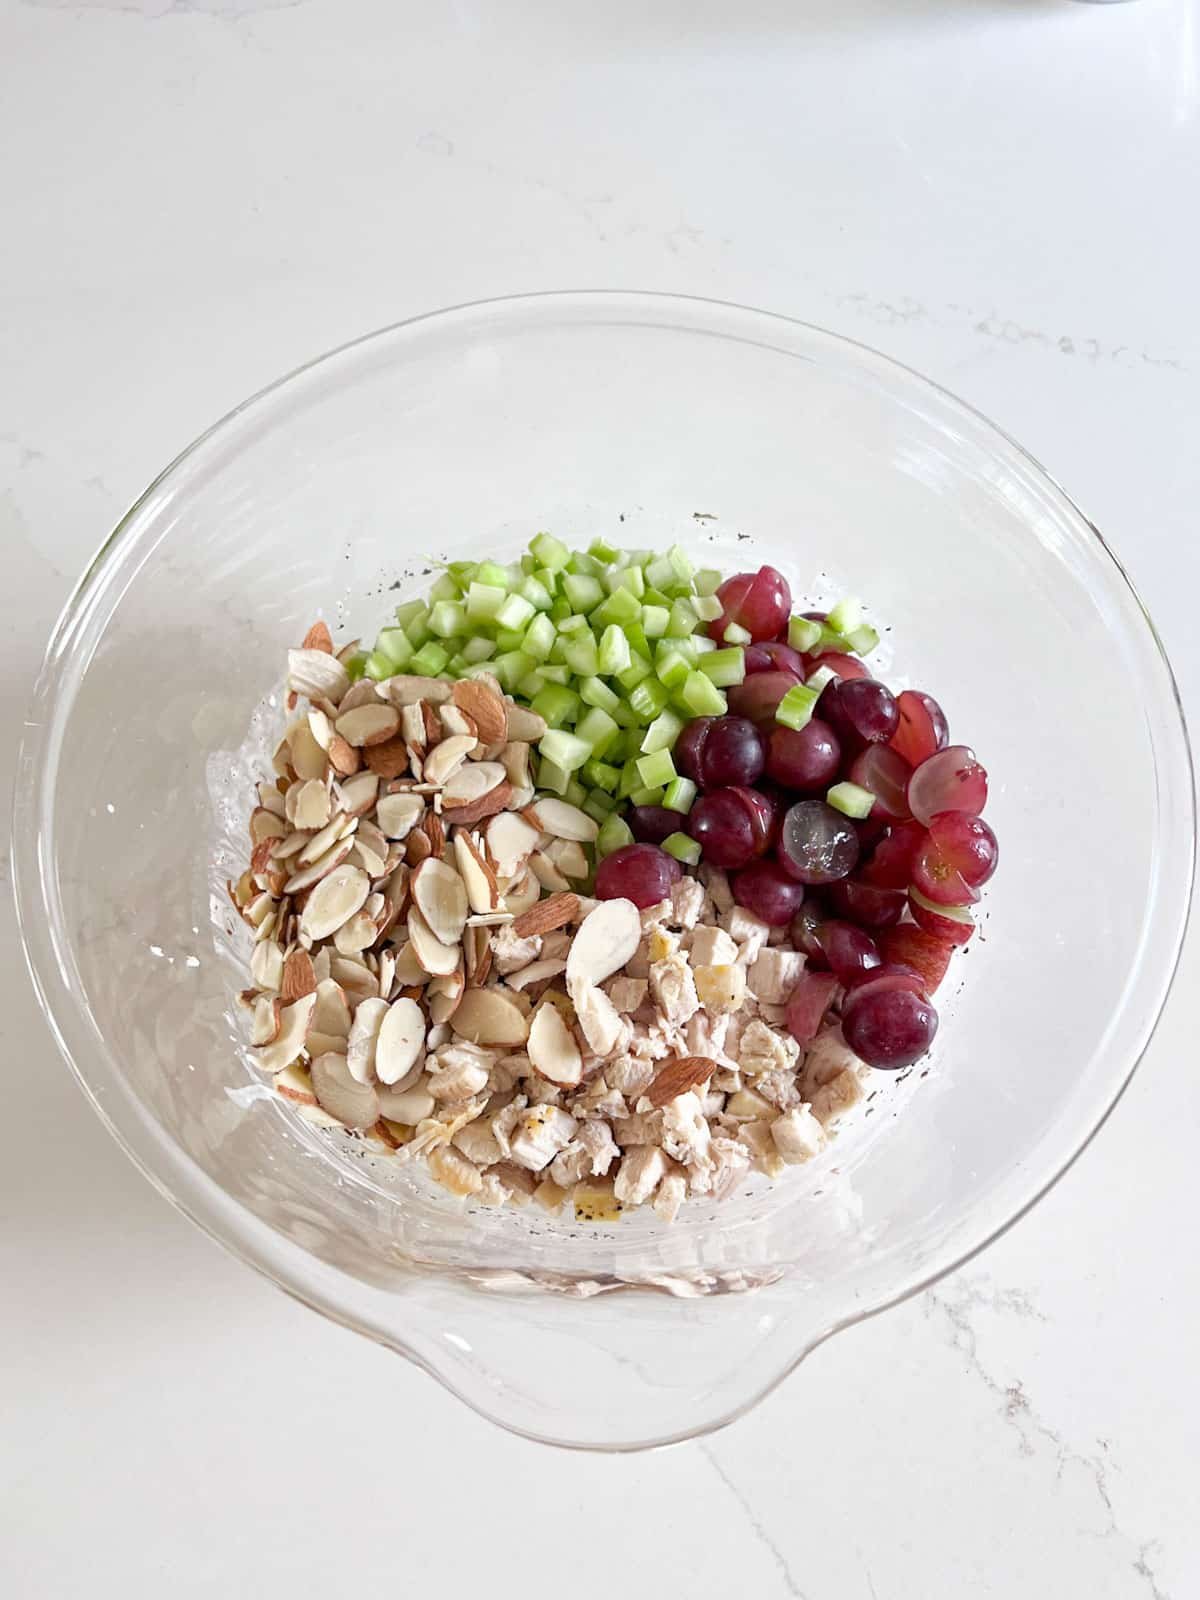 Chicken, almonds, celery and grapes added into the bowl.